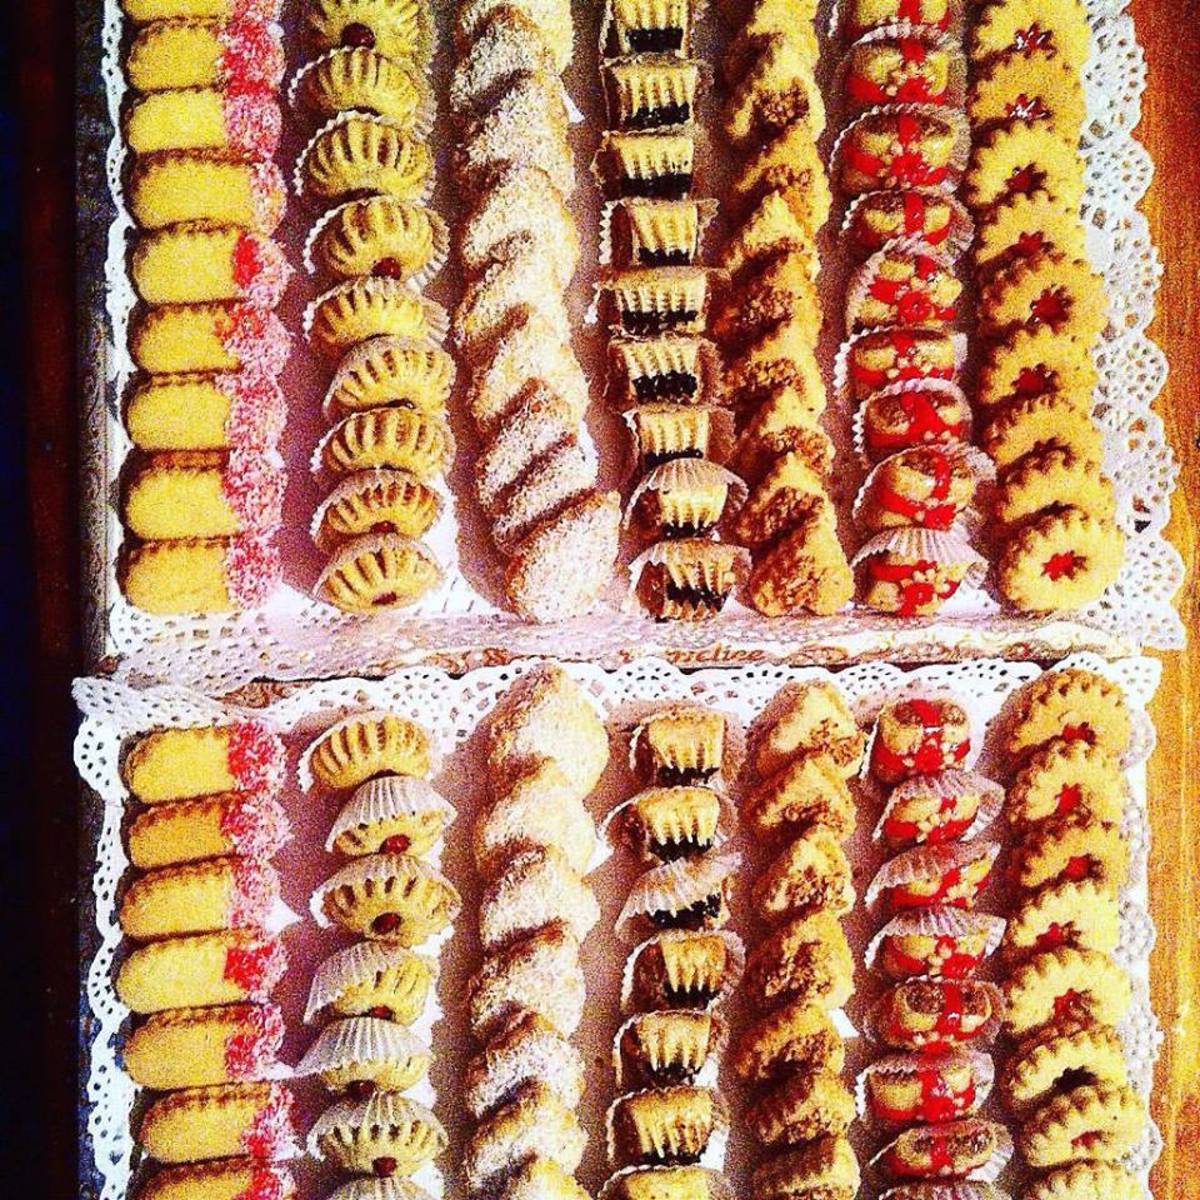 A tray of sweets ready for a wedding.  Parties and social gatherings are always well-equipped with platters of sugary delicacies.  